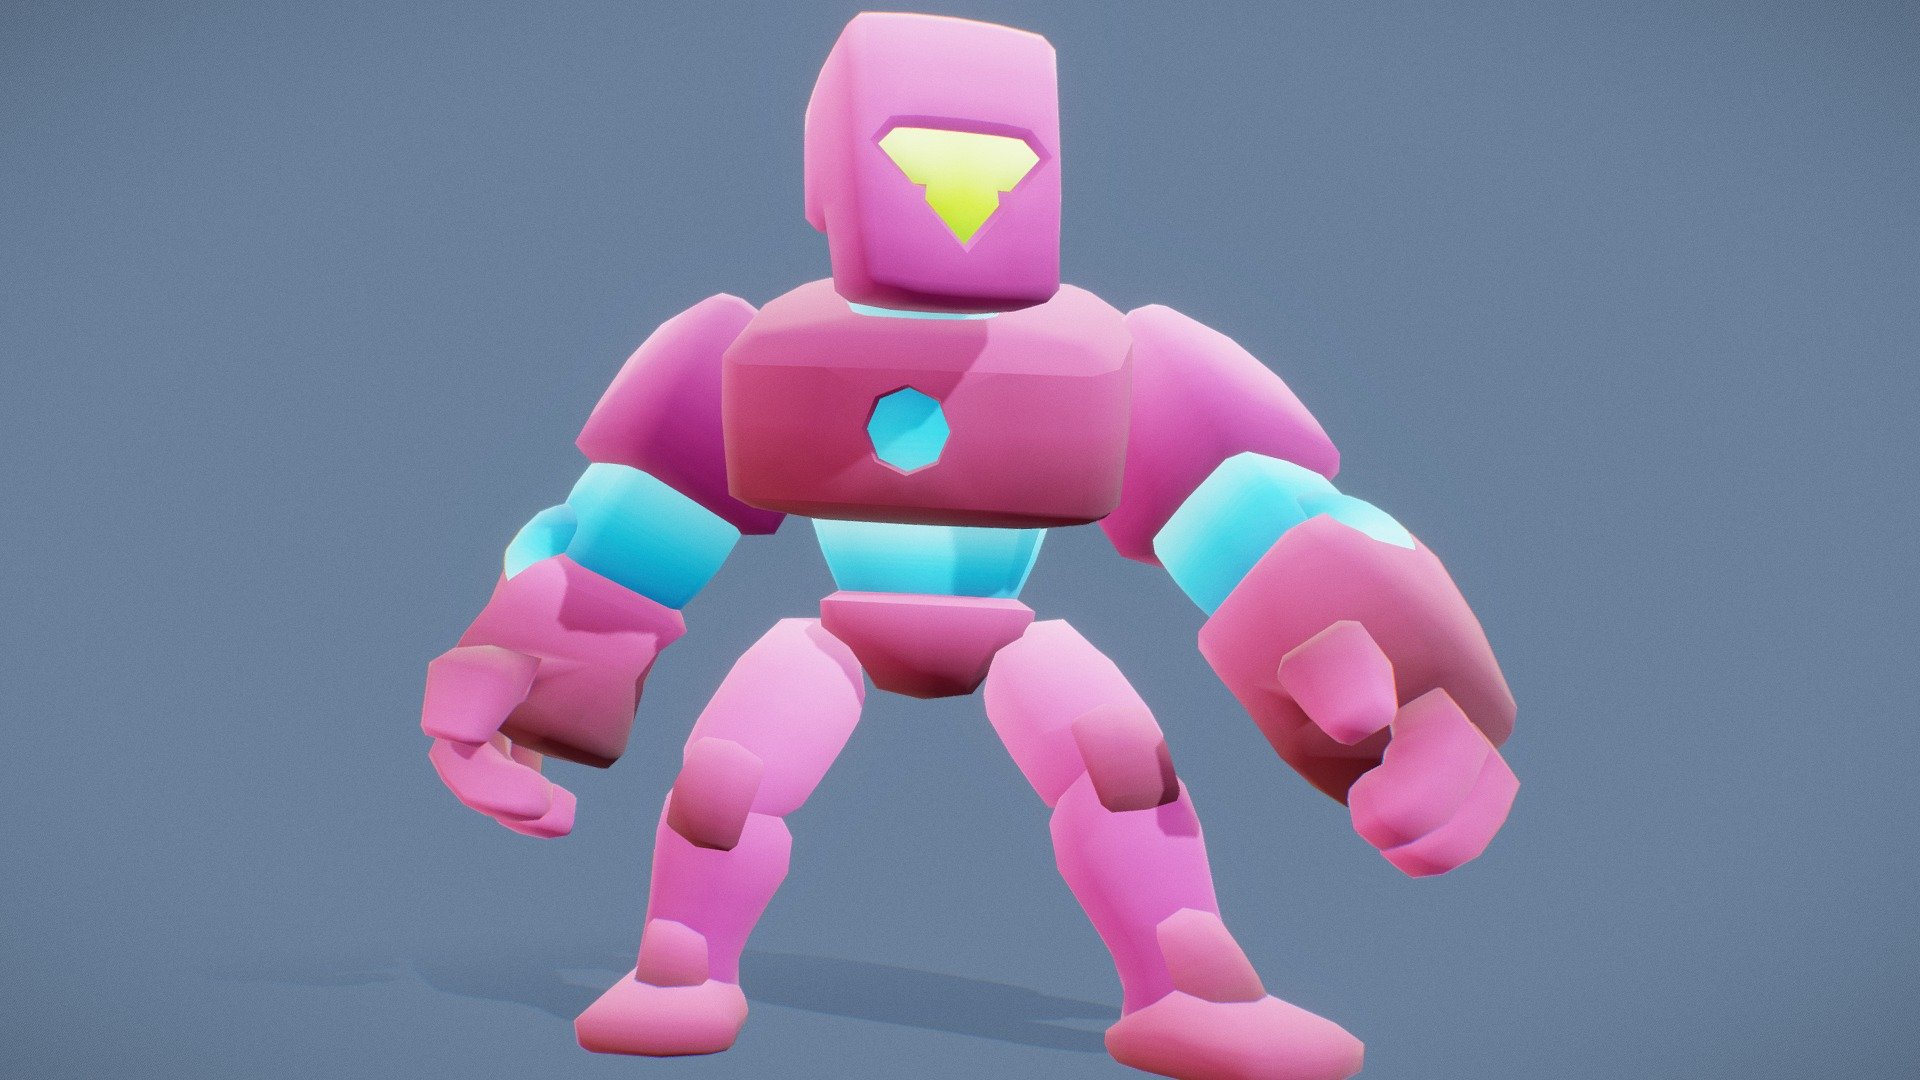 Tortex Robot

This model has 3 forms of evolution

The model is made as an enemy for your main character. Each stage of evolution makes him stronger and stronger, so you can use it to progress your opponents and as enemy boss.
It's suitable for different genres of games, such as runners, tower defense, RPG and many others.

If you liked this model, please rate it, it is extremely important for us!

Quantity
This pack contains 1  model of Tortex Robot

Features




1 gradient base texture 32x32 pixels.

Mobile, AR/VR ready

Standart/URP materials

UV Mapped for gradient texture

Low Poly

No Vertex colors

Total triangles 3k

No LOD

Animations




Idle

Run

Walk

Step Back

Step Left

Step Right

Attack Left

Attack Right

Shooting Left

Shooting Right

Jump

Rage

Defence

Damage

Death

If that wasn't enough, we are ready to make additional animations and forms on request 3d model